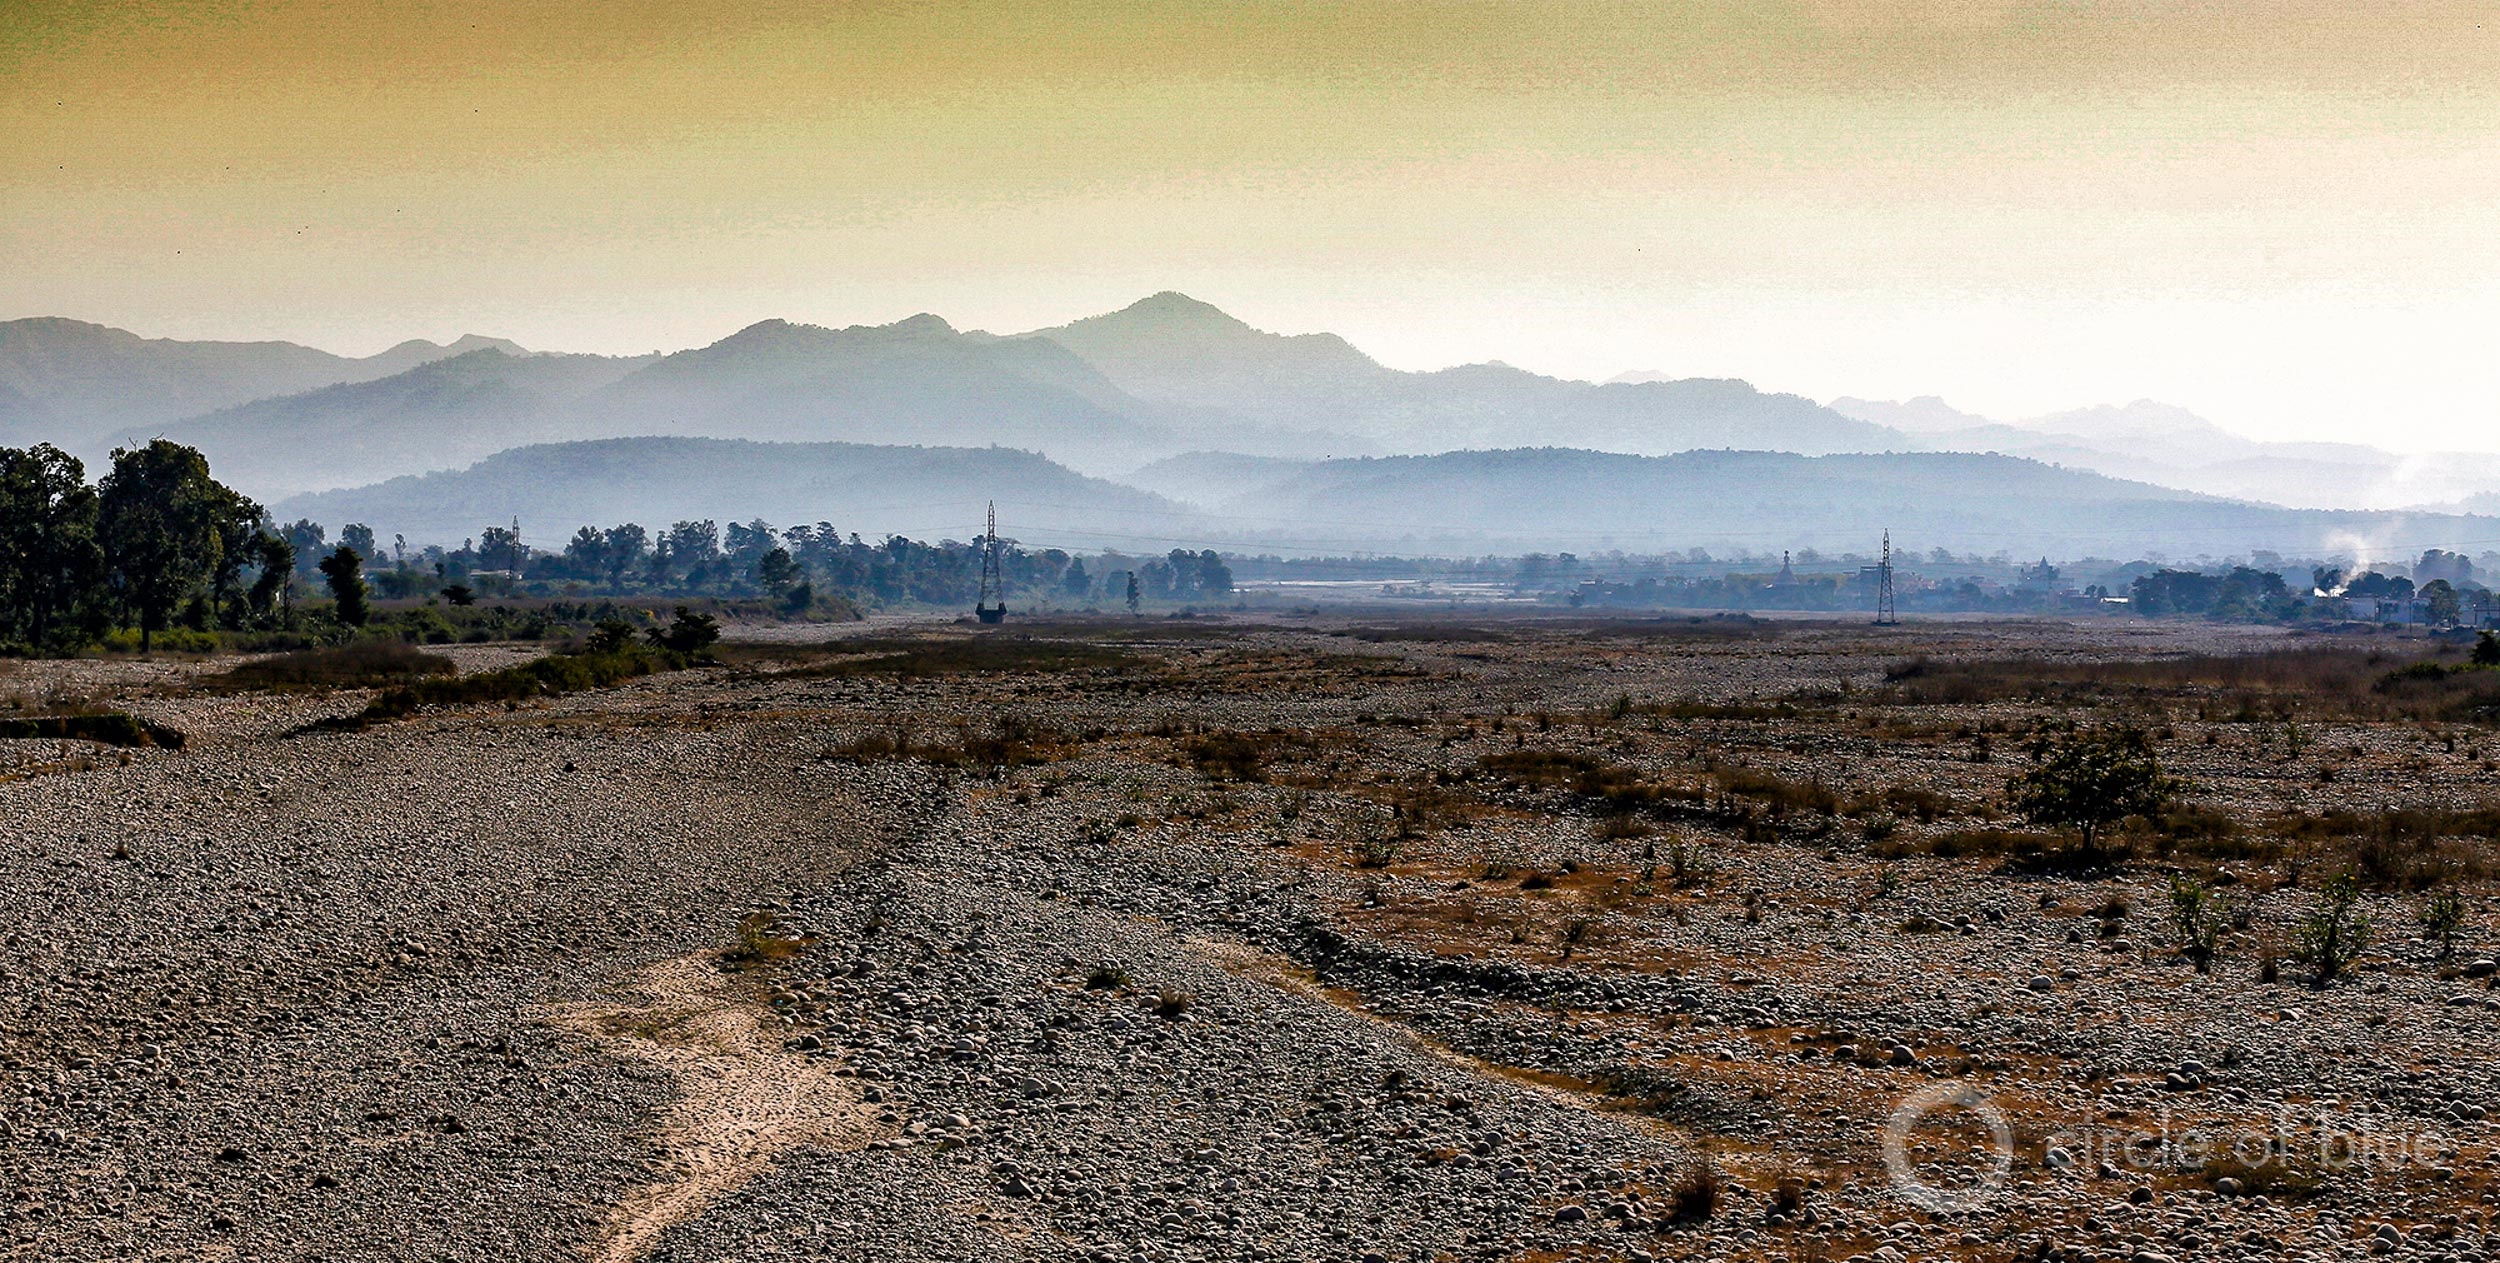 The latest national drought assessment shows that 19 of the 36 states and territories in India are experiencing moisture deficits of at least 50 percent when compared to normal years of rainfall. Above, a dry riverbed in Uttarakhand, a Himalayan state. Photo © Dhruv Malhotra